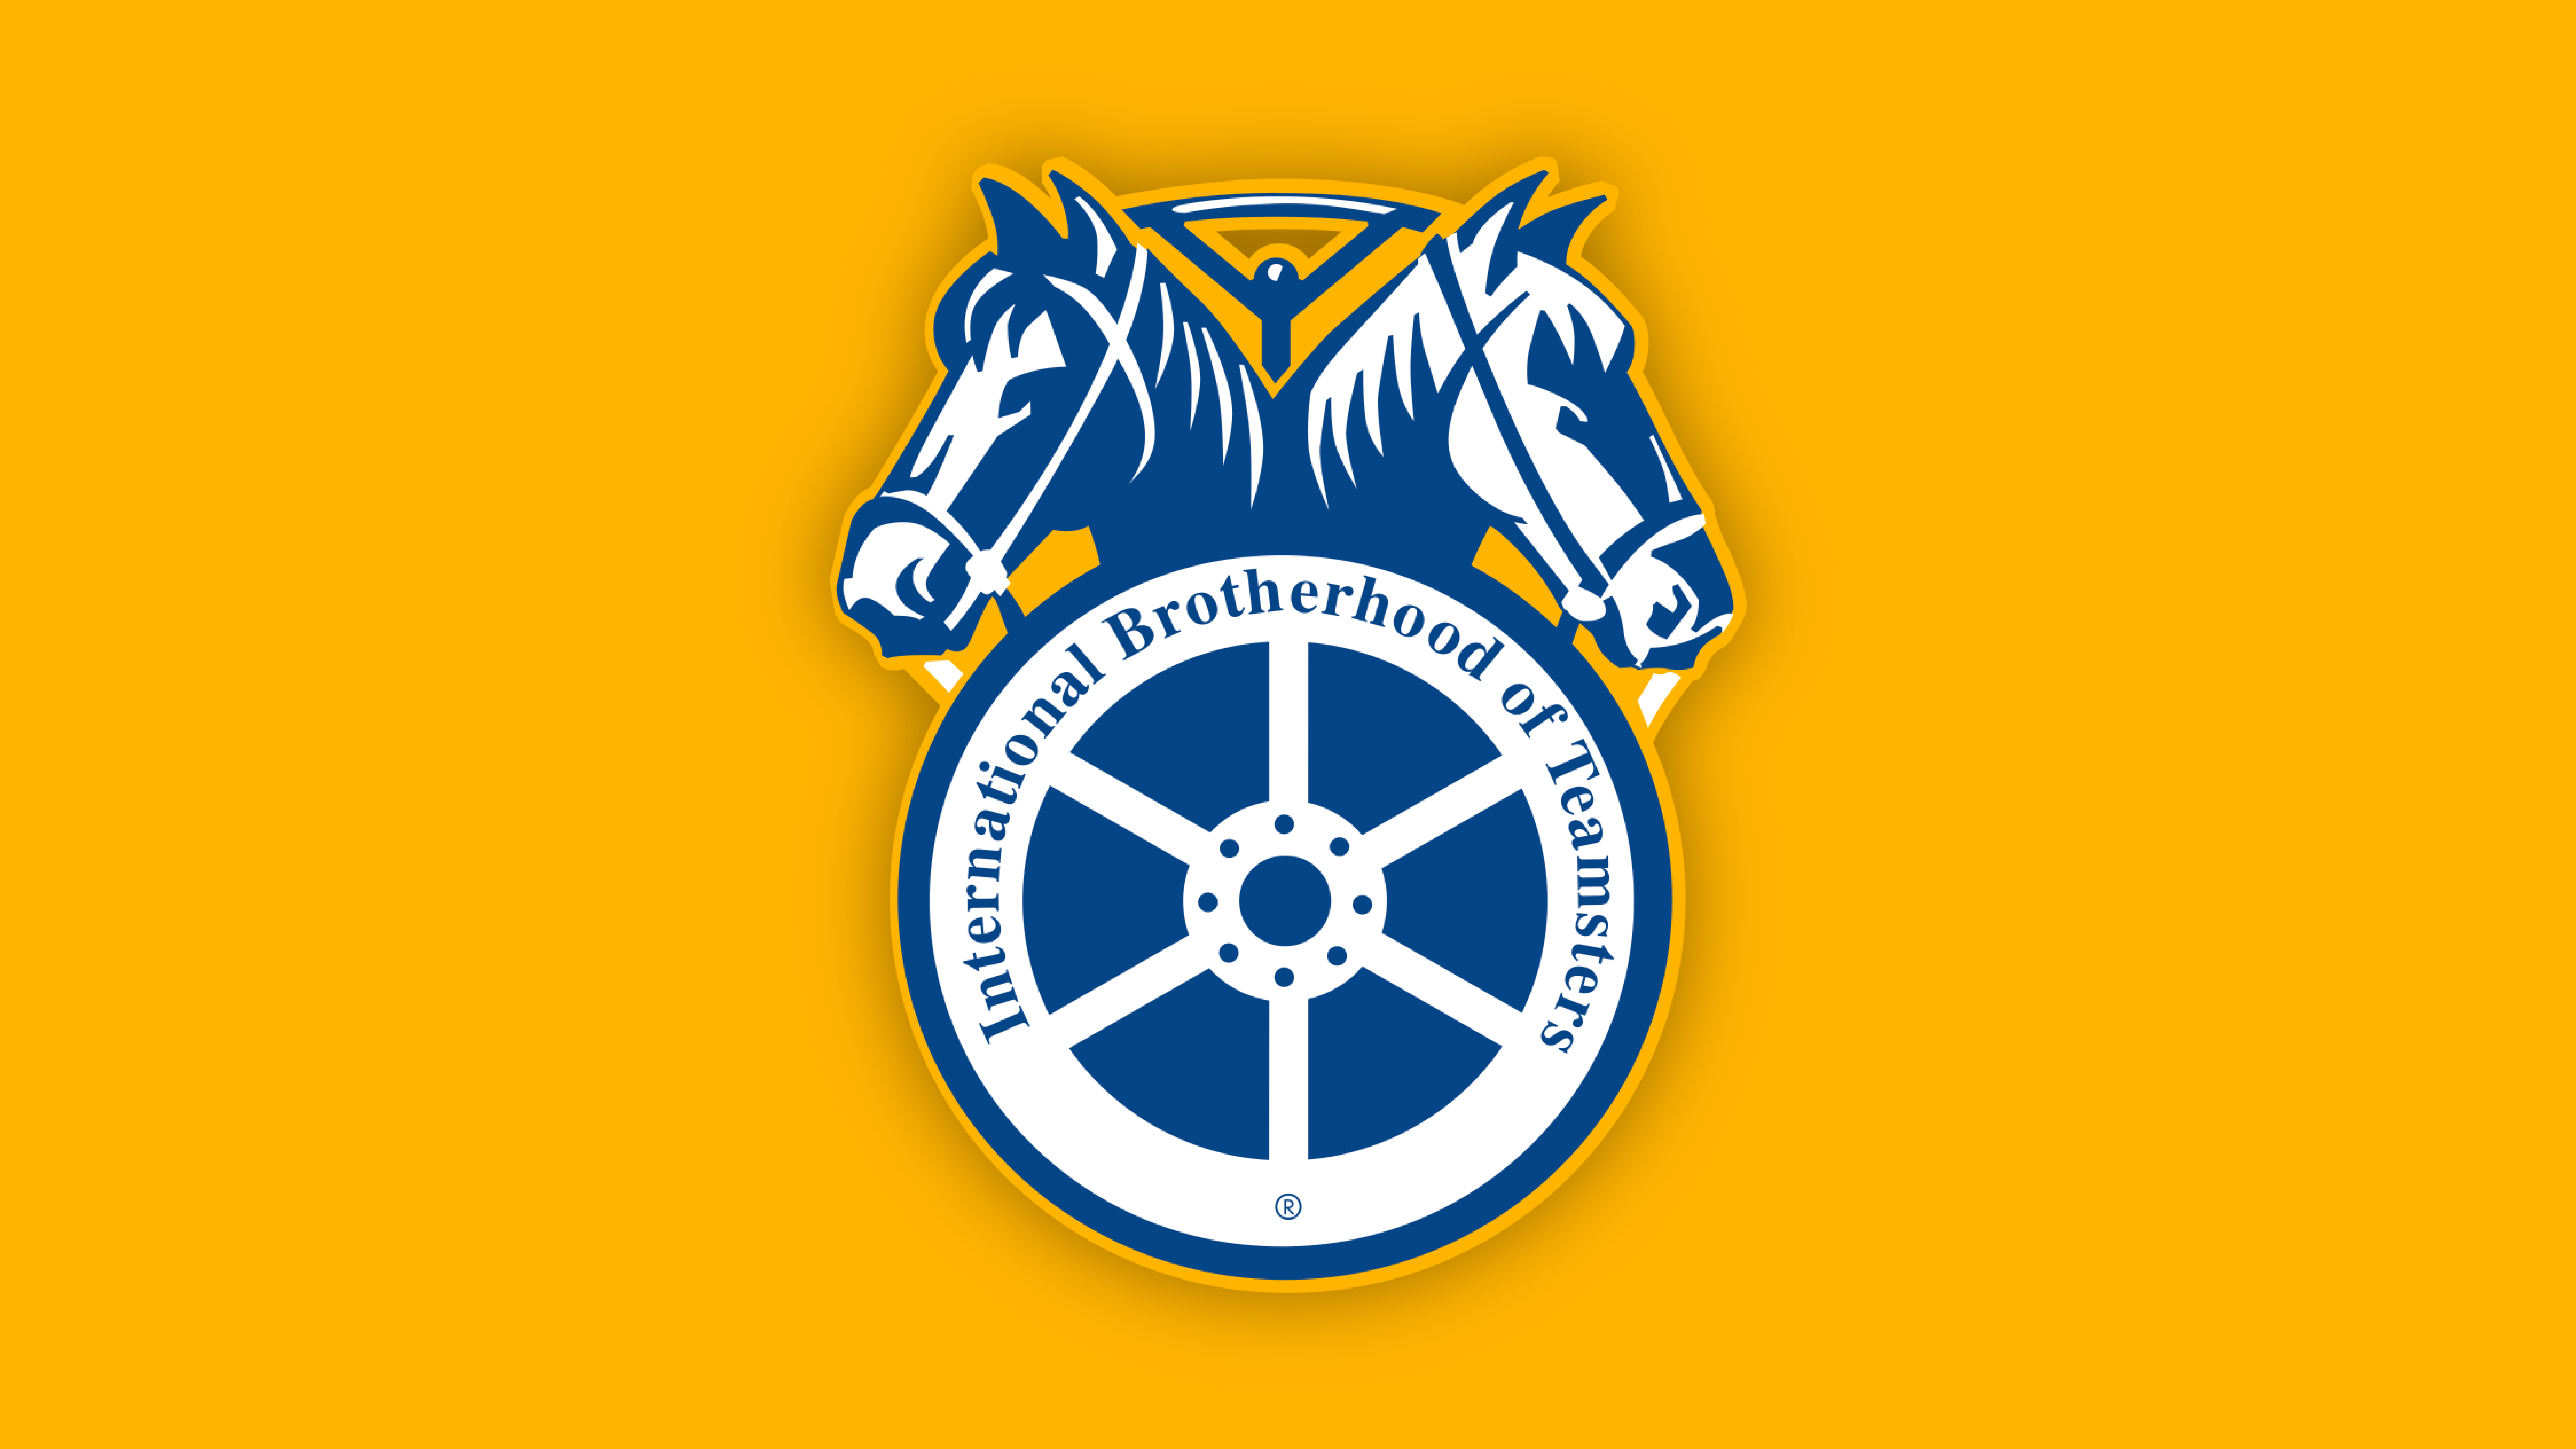 Logo of the International Brotherhood of Teamsters featuring two horse heads and a wheel set against a yellow background.